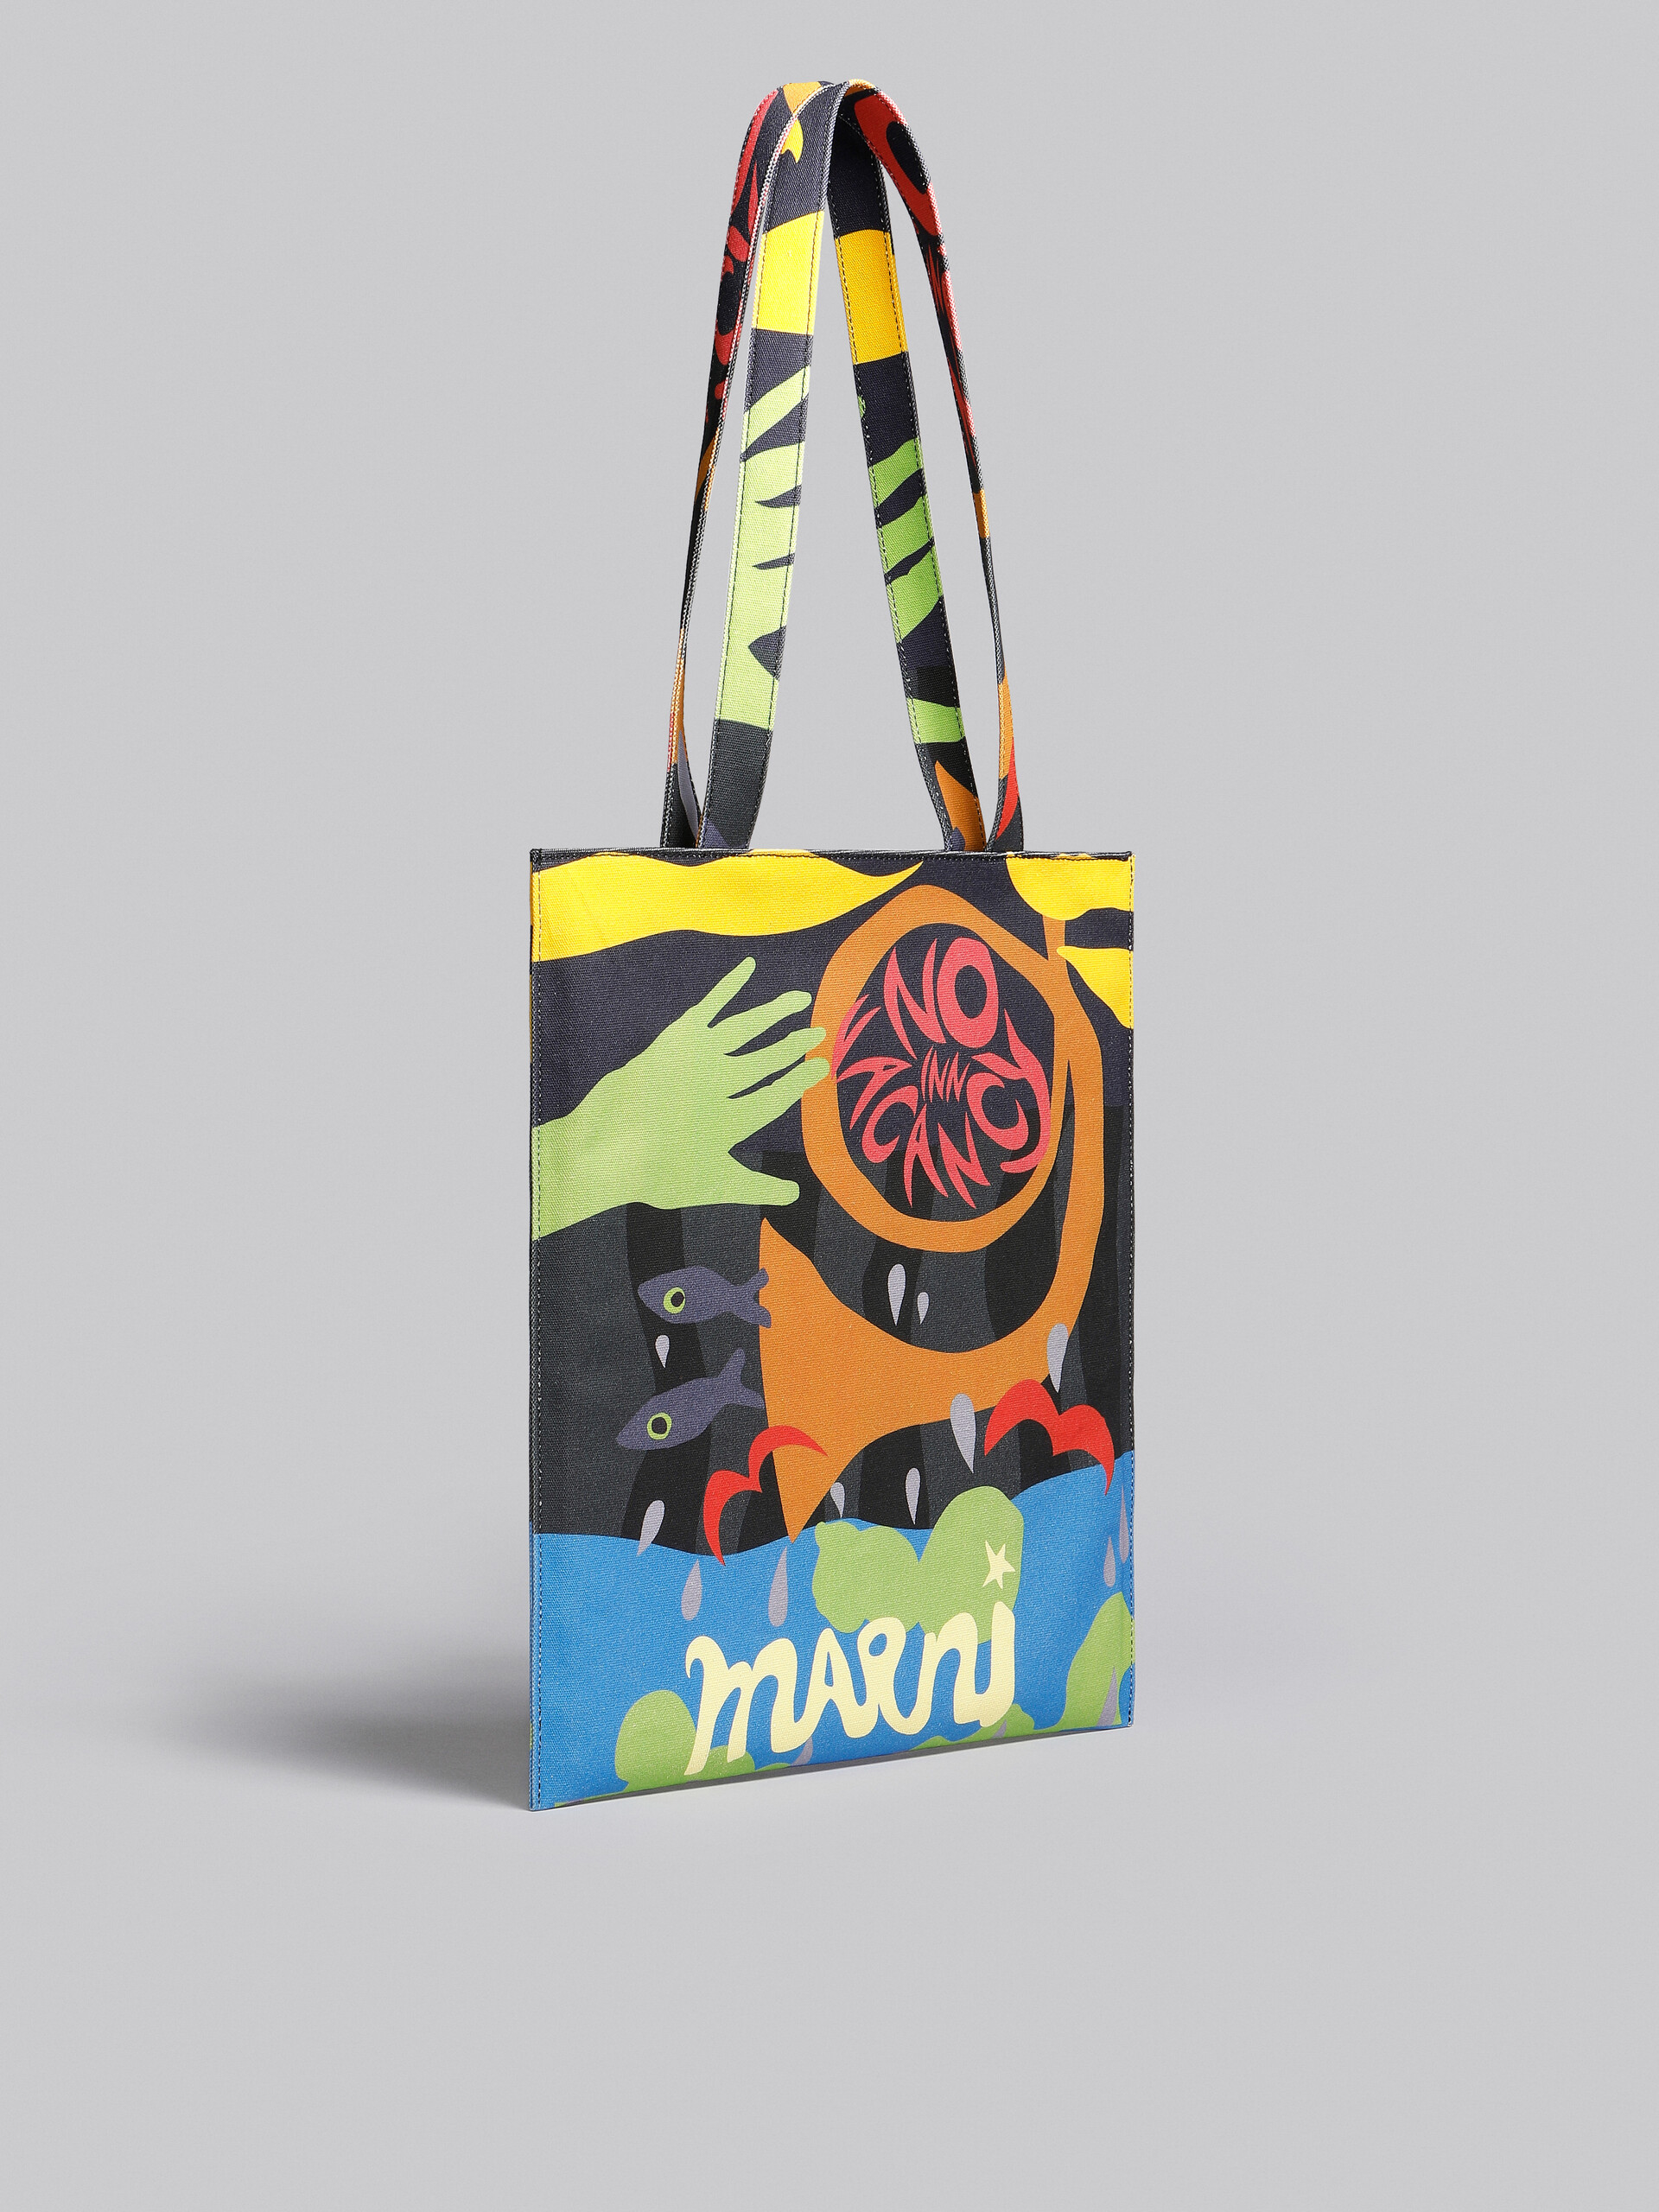 Marni x No Vacancy Inn - Tote Bag in coated canvas with print - Shopping Bags - Image 6